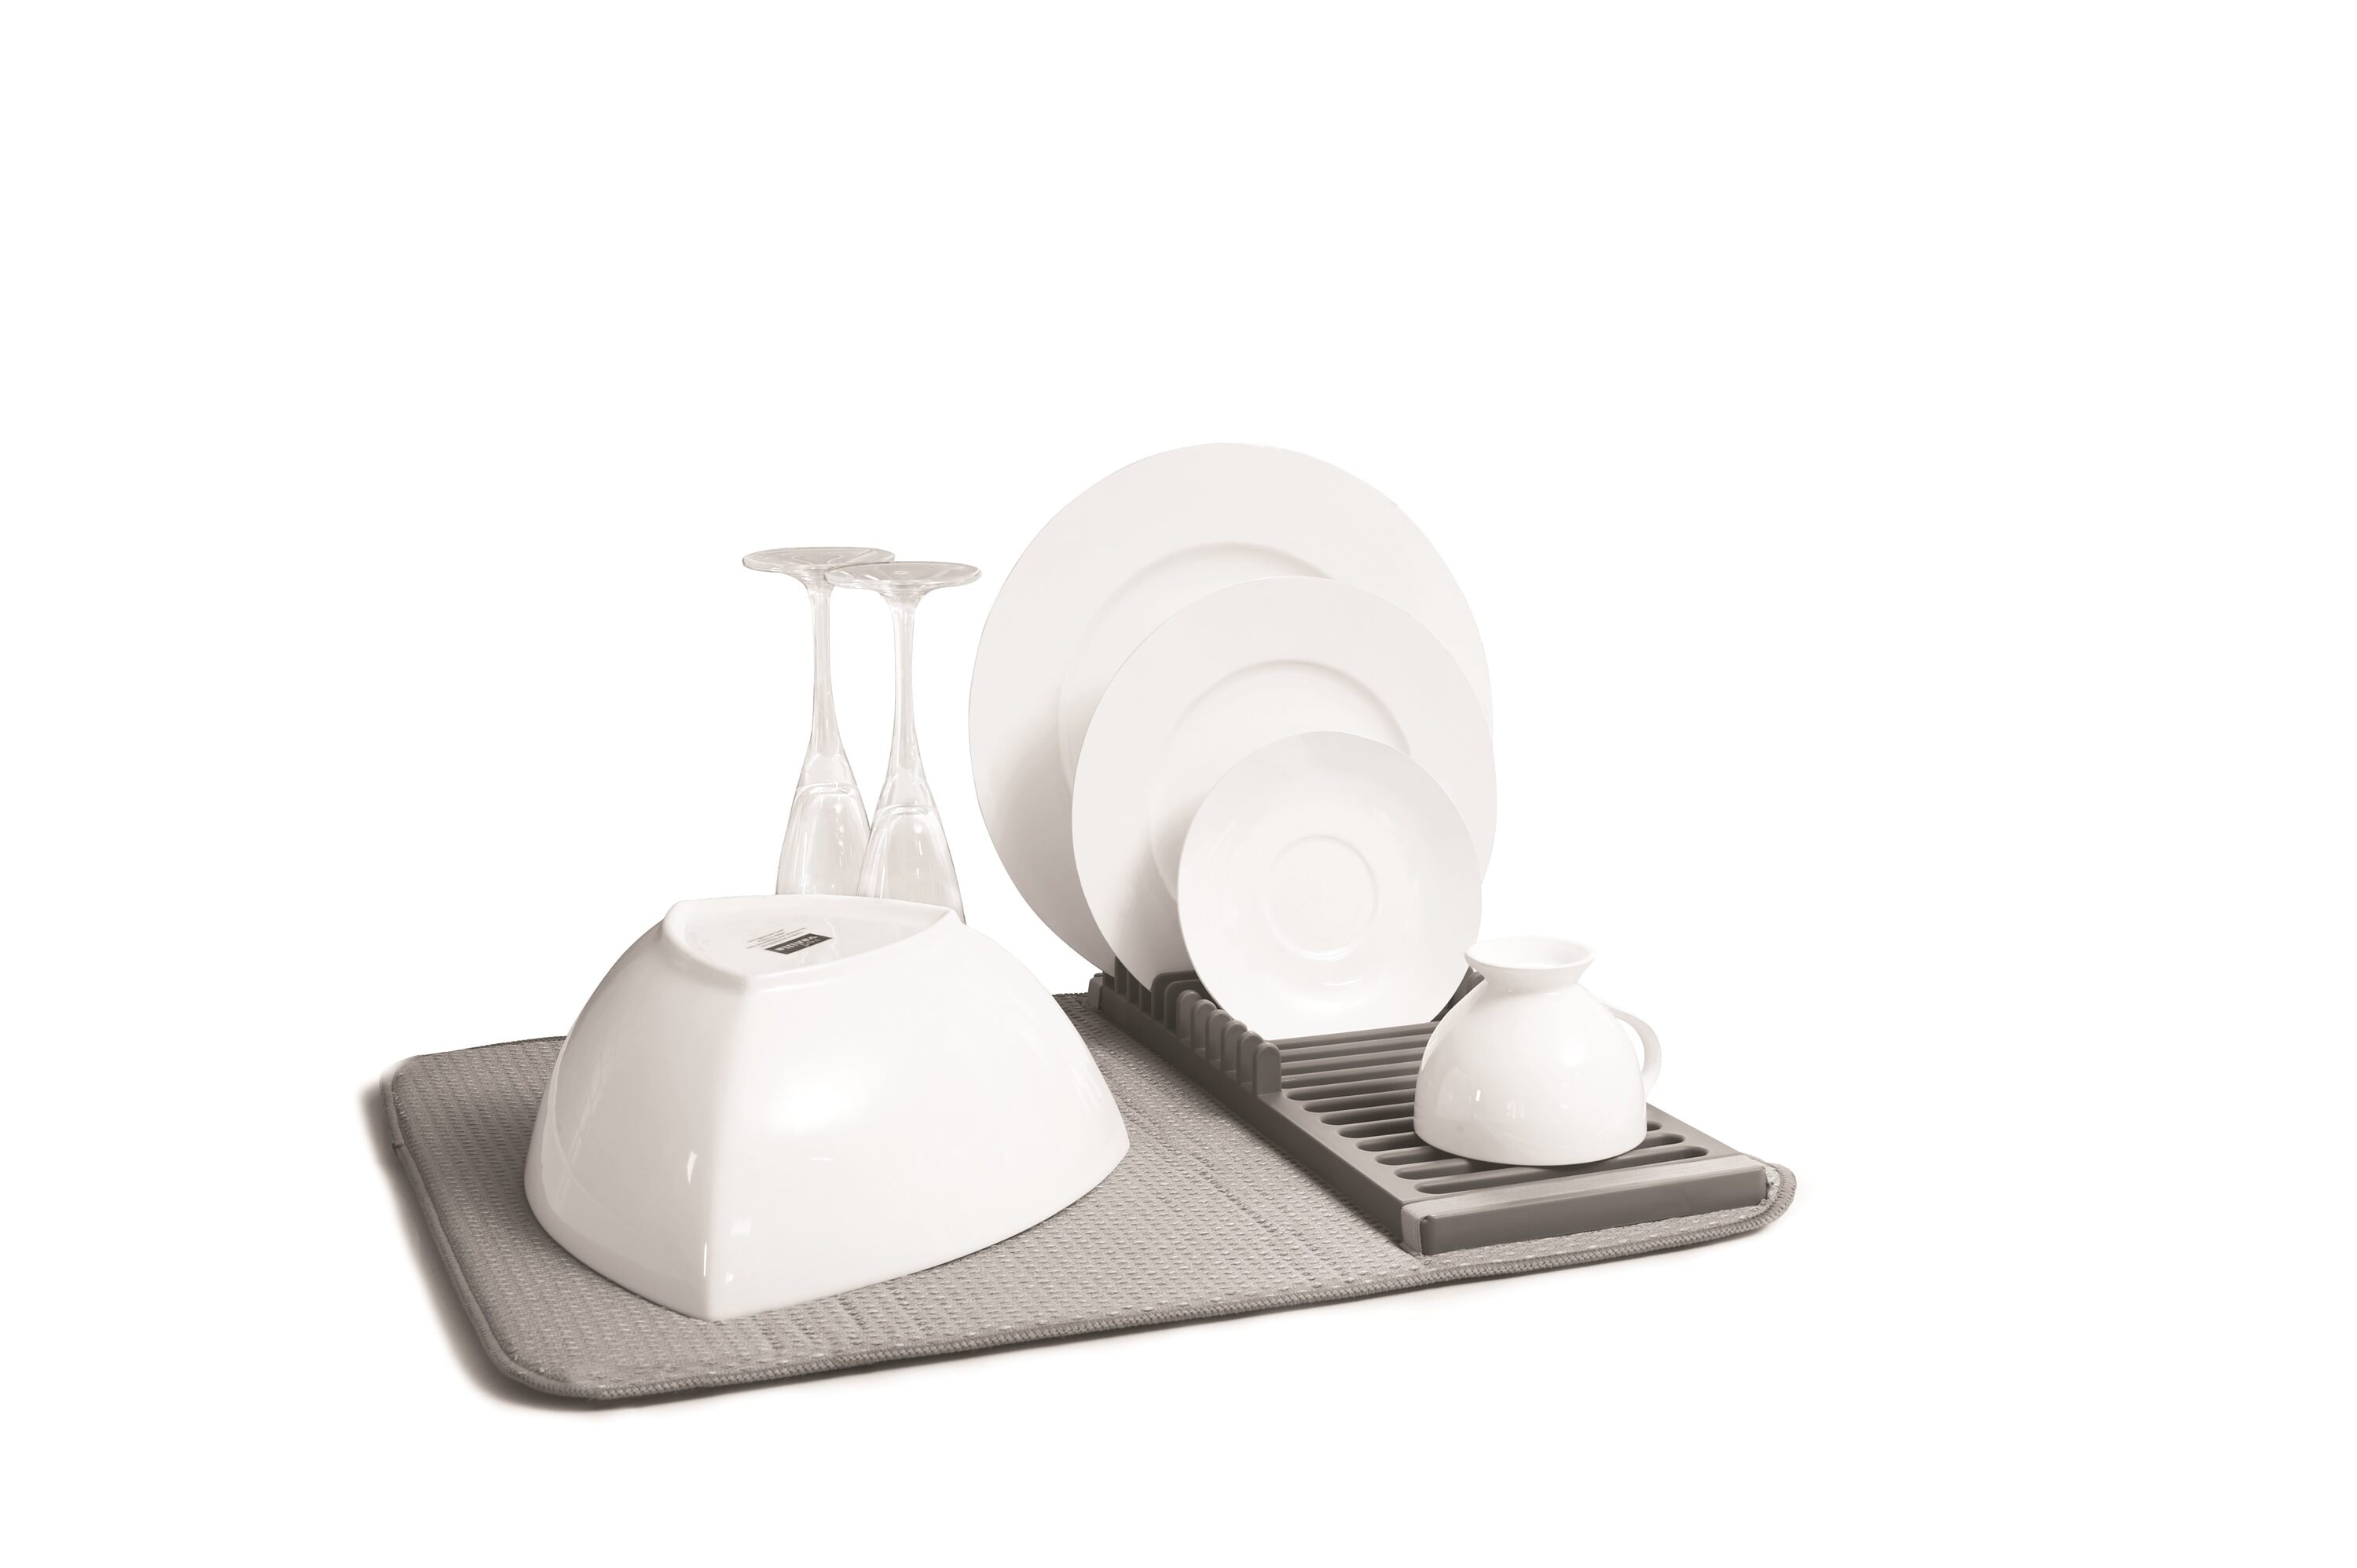 UDry Mini Dish Drying Rack with Mat